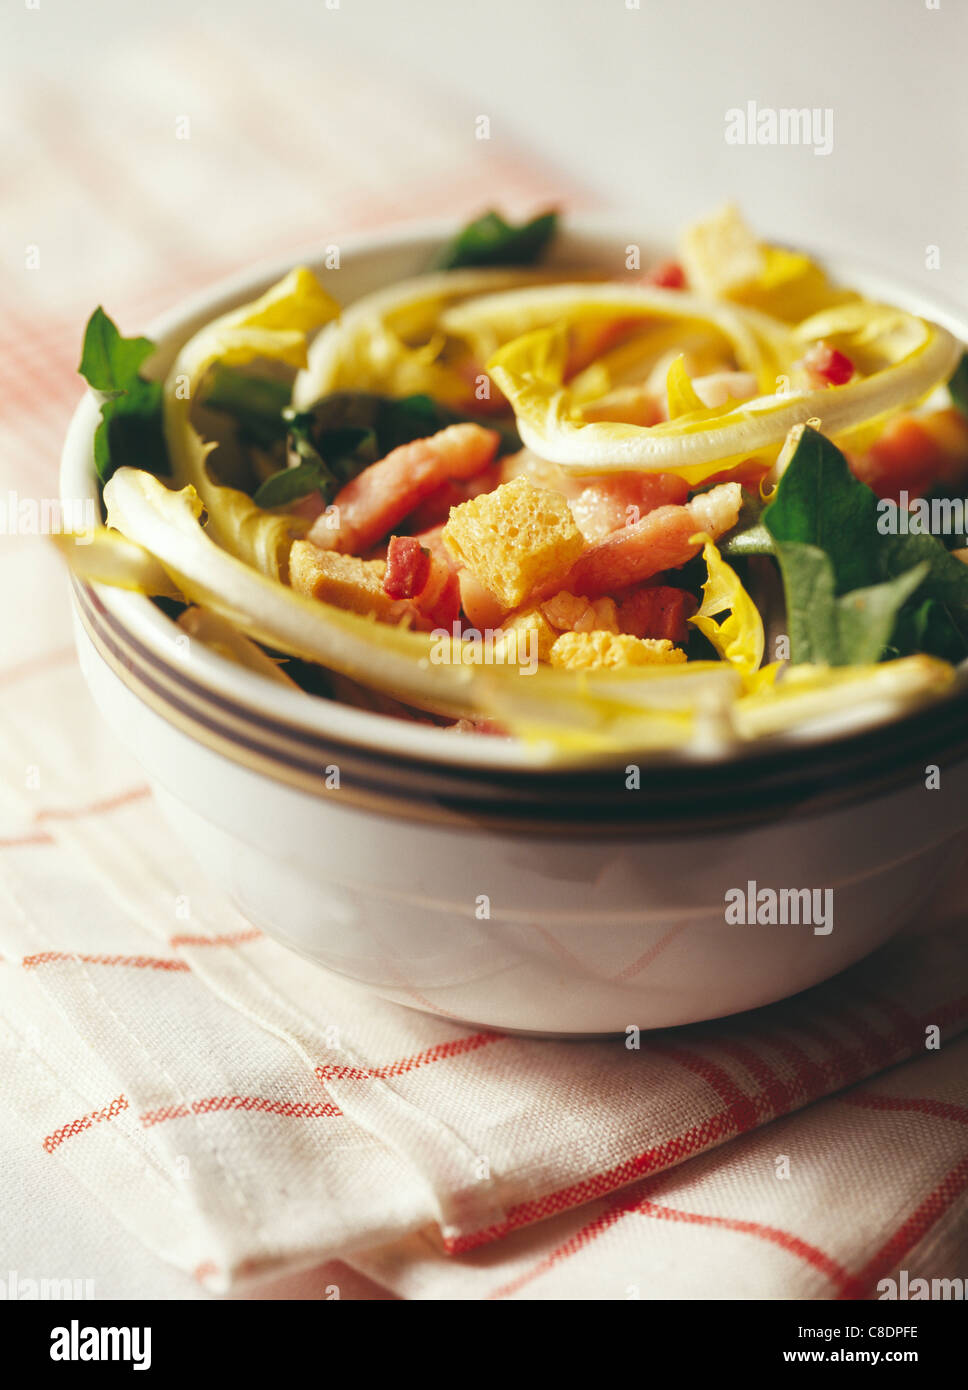 Curly endive,dandelion and diced bacon salad Stock Photo